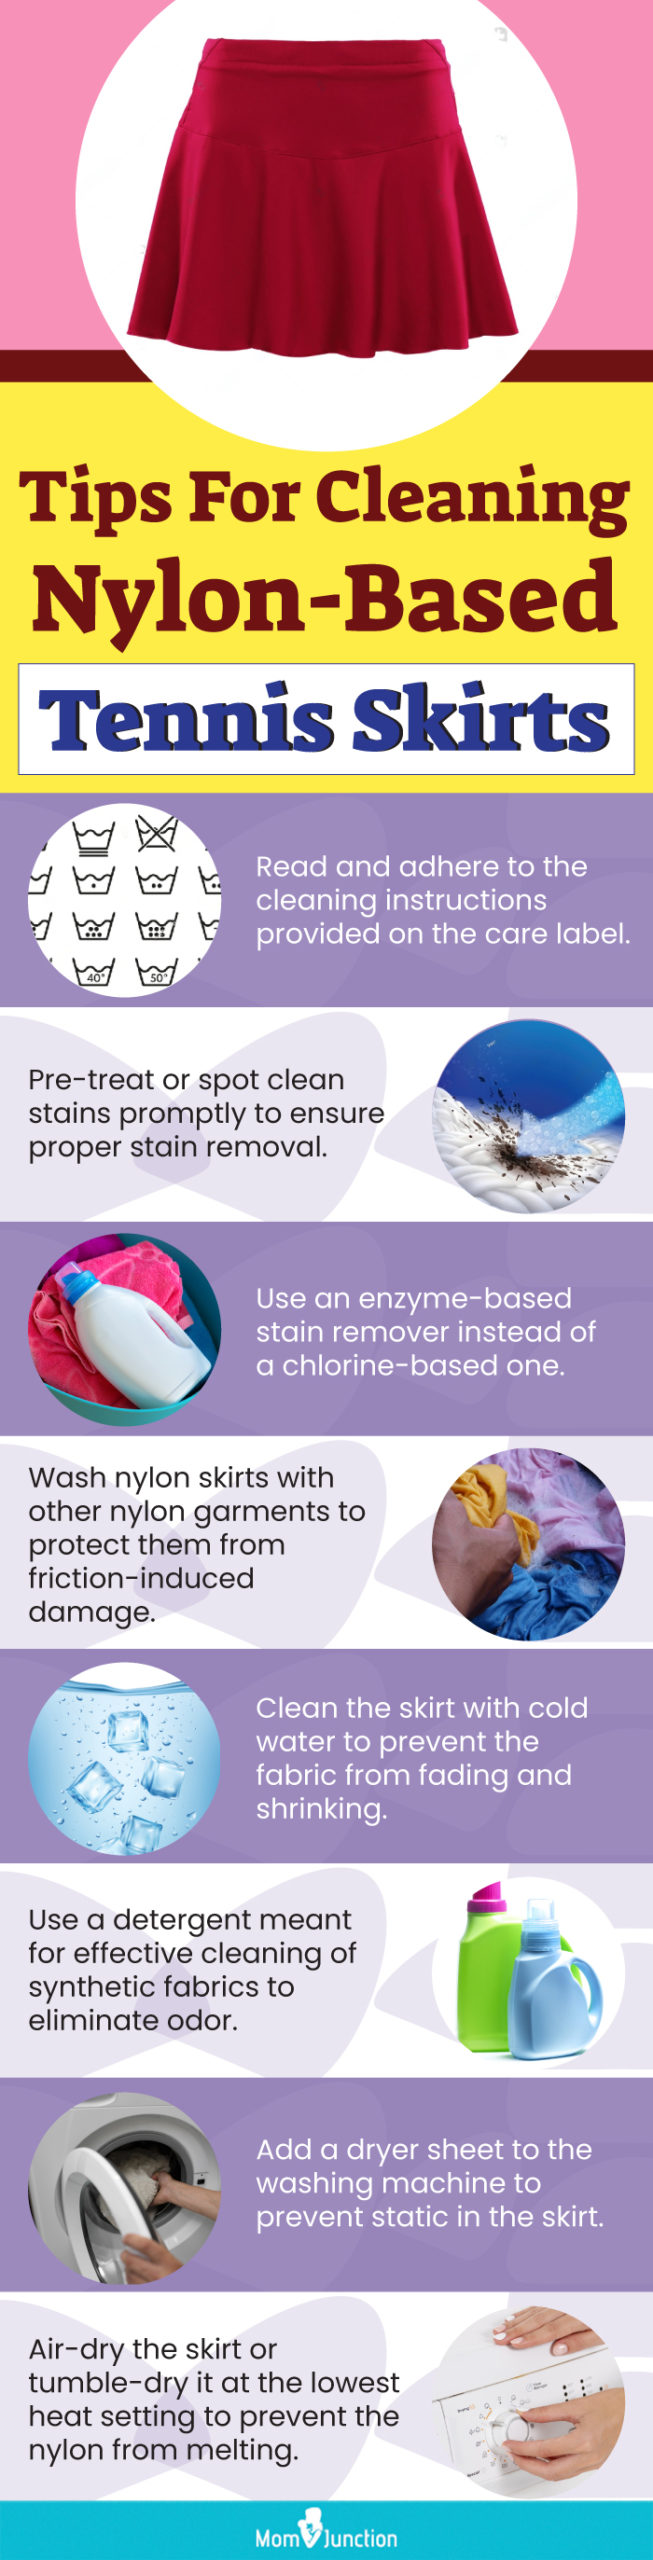 Tips For Cleaning Nylon Based Tennis Skirts (infographic)